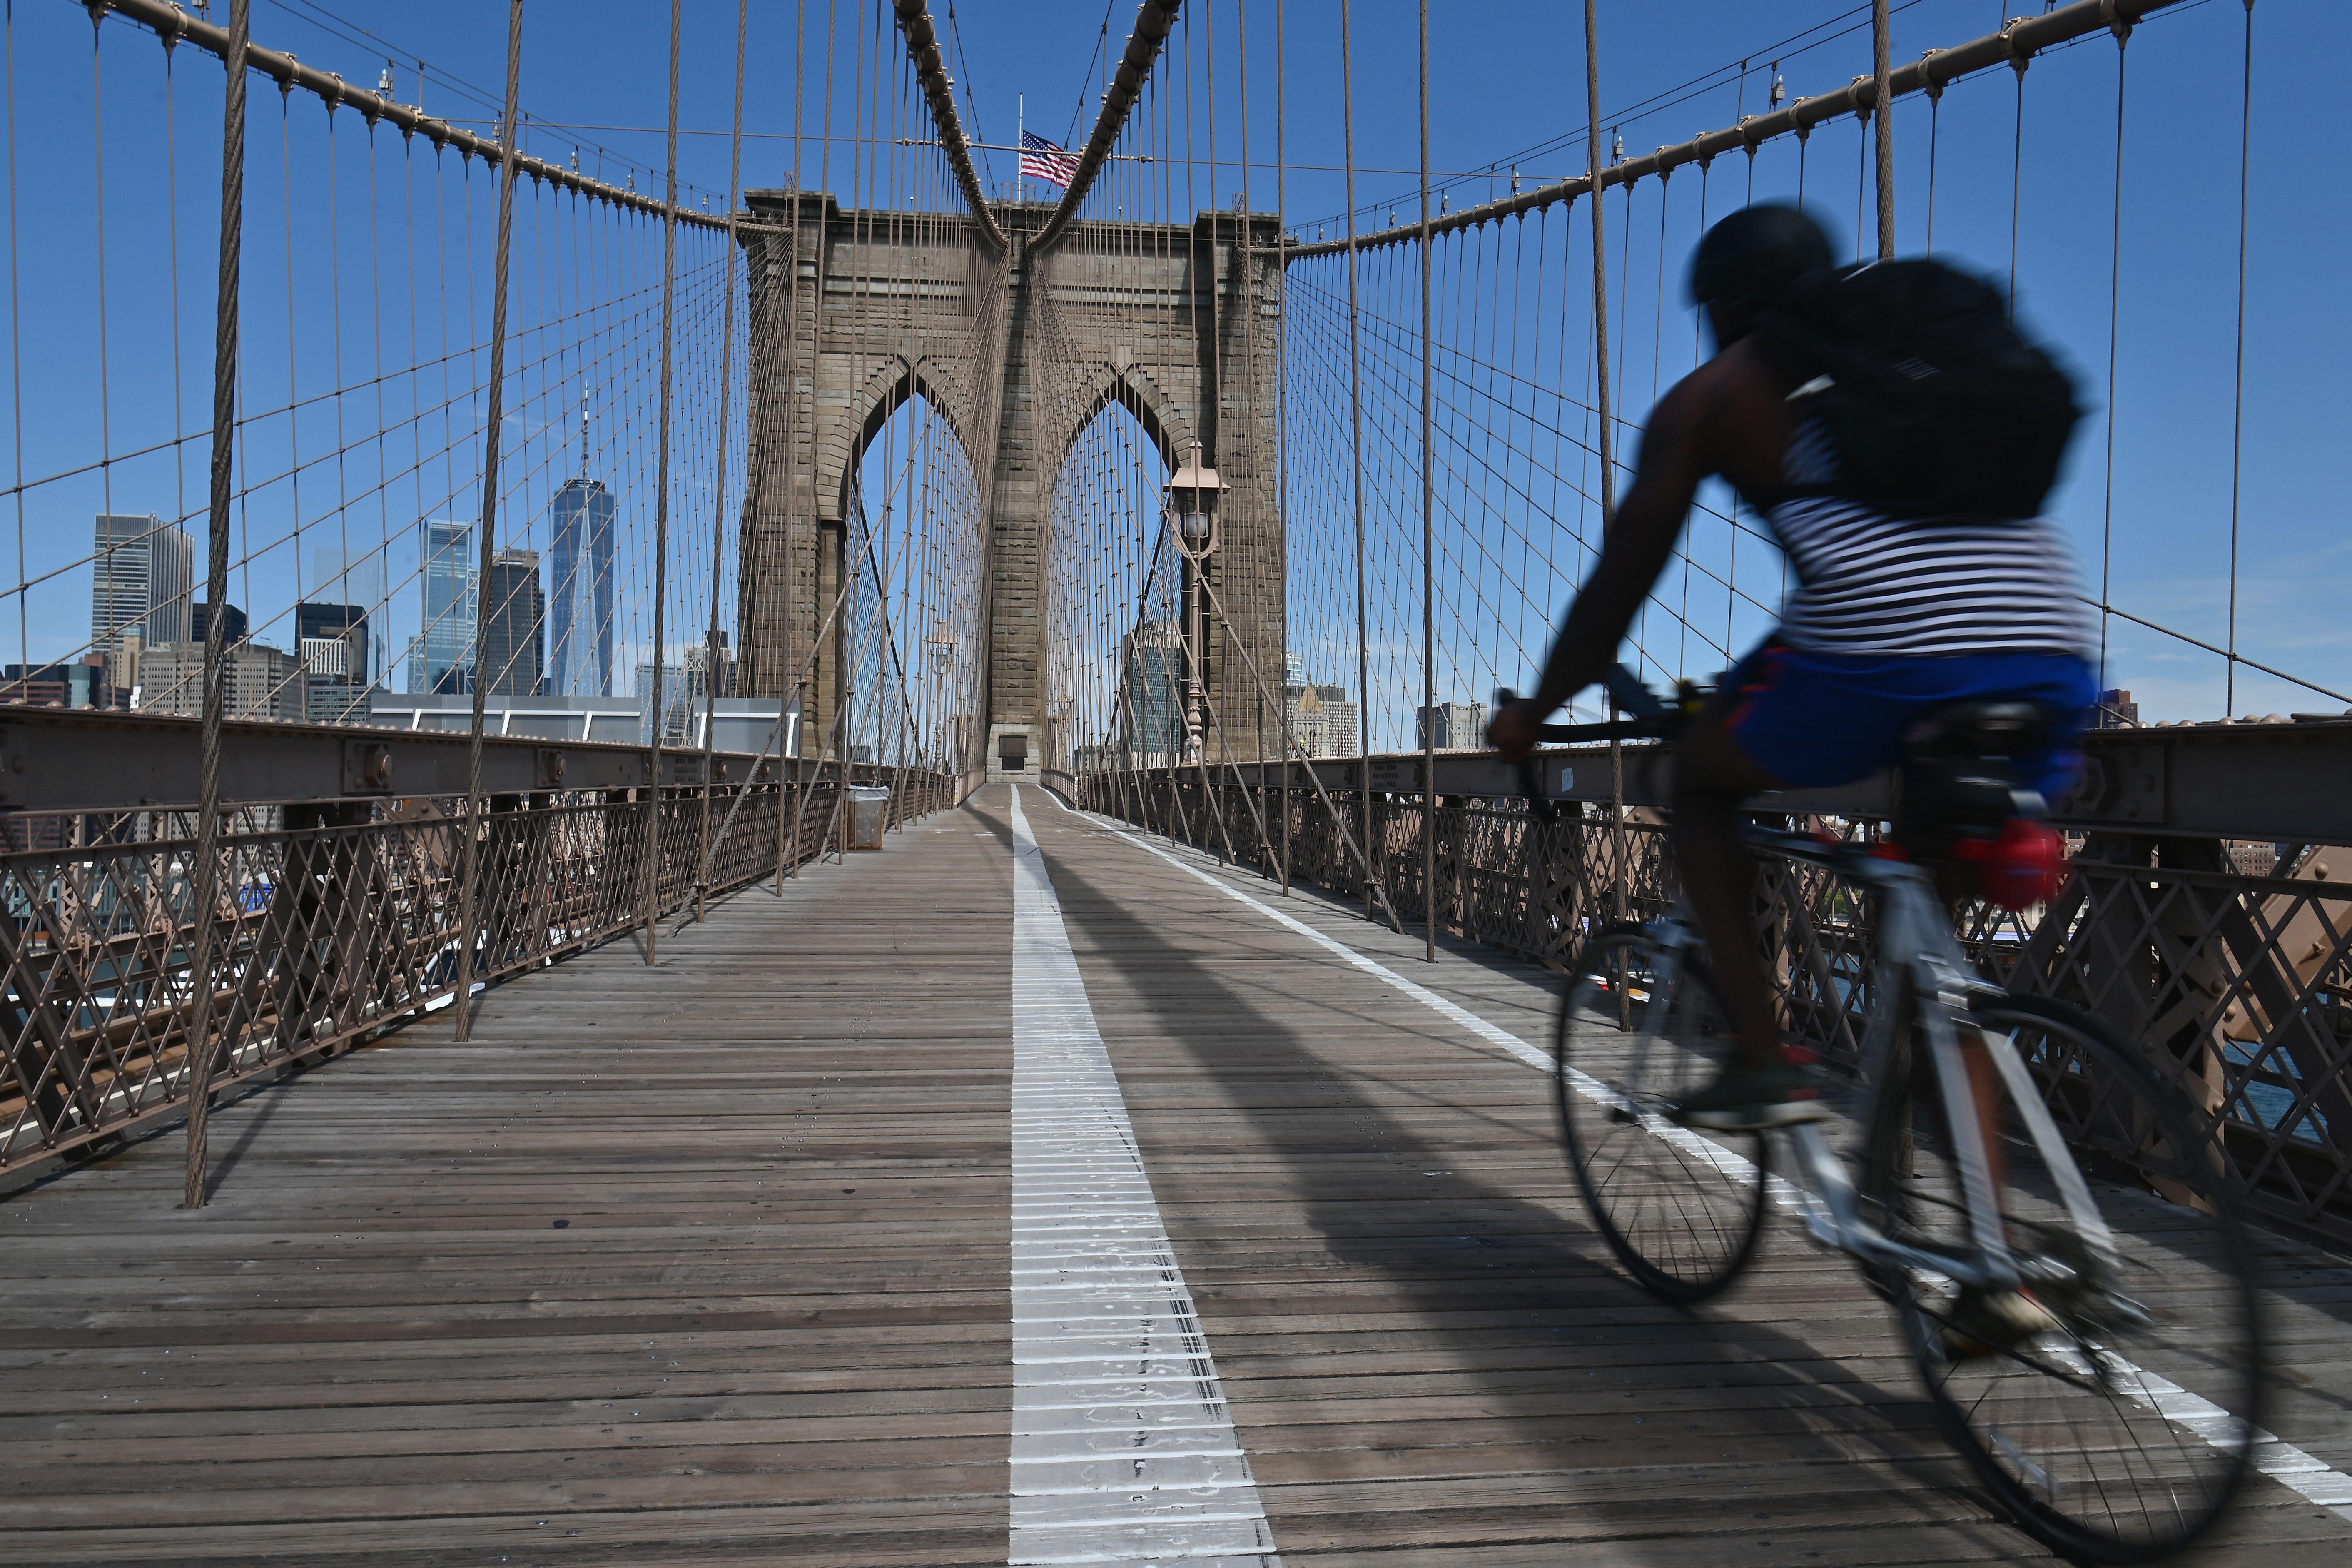 People ride bikes to commute over the Brooklyn Bridge amid the coronavirus pandemic on August 3, 2020 in New York City. (Photo by Angela Weiss / AFP) (Photo by ANGELA WEISS/AFP via Getty Images)